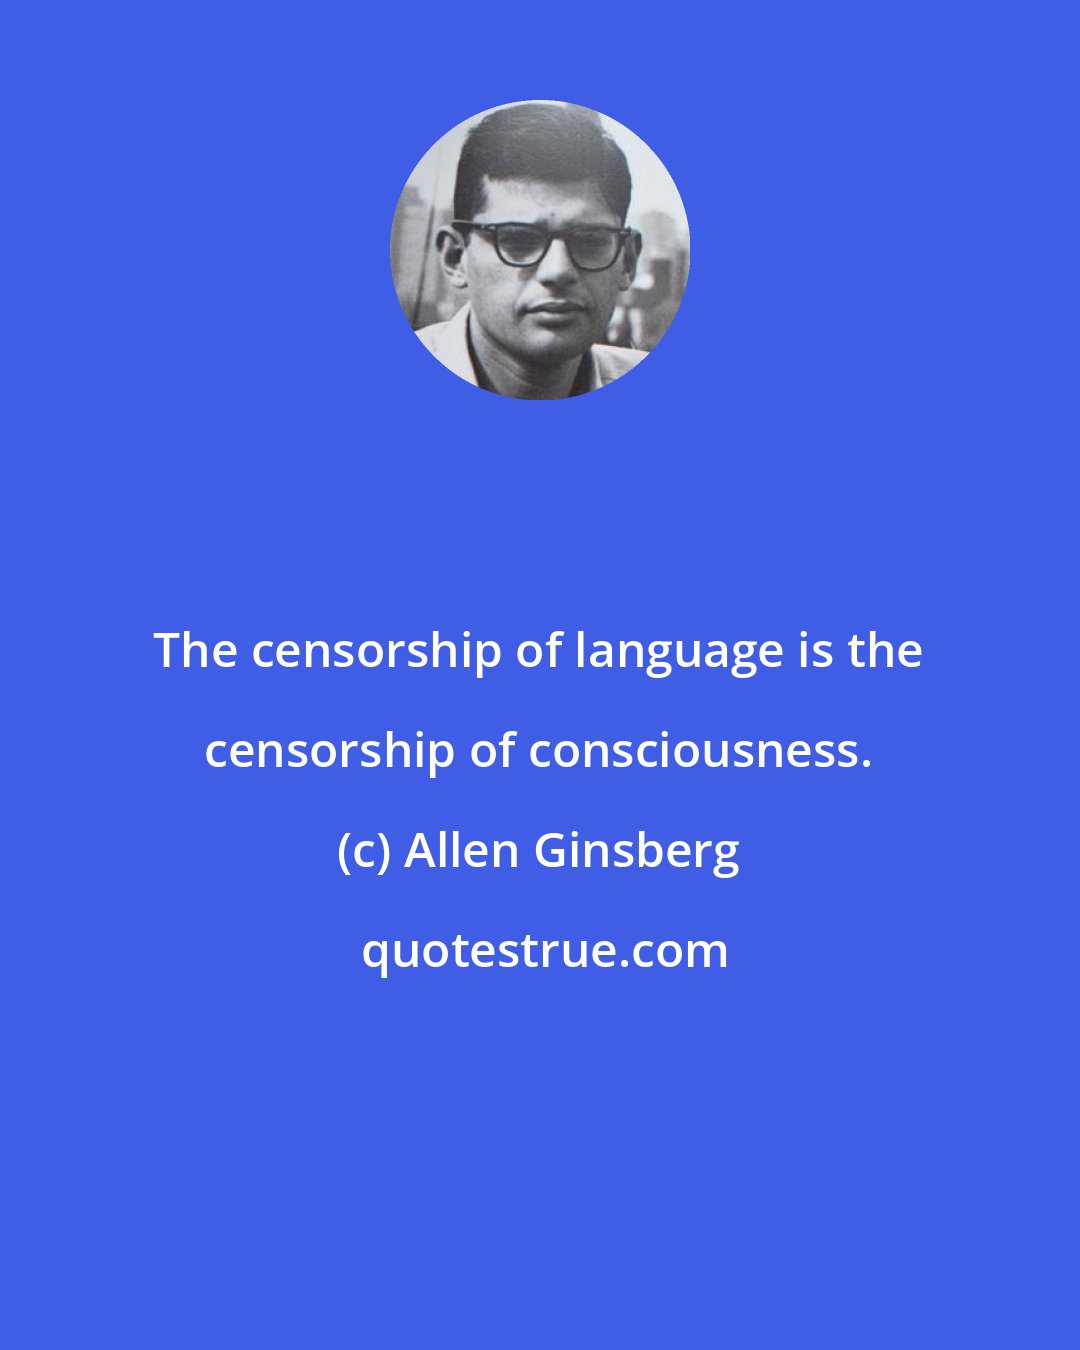 Allen Ginsberg: The censorship of language is the censorship of consciousness.